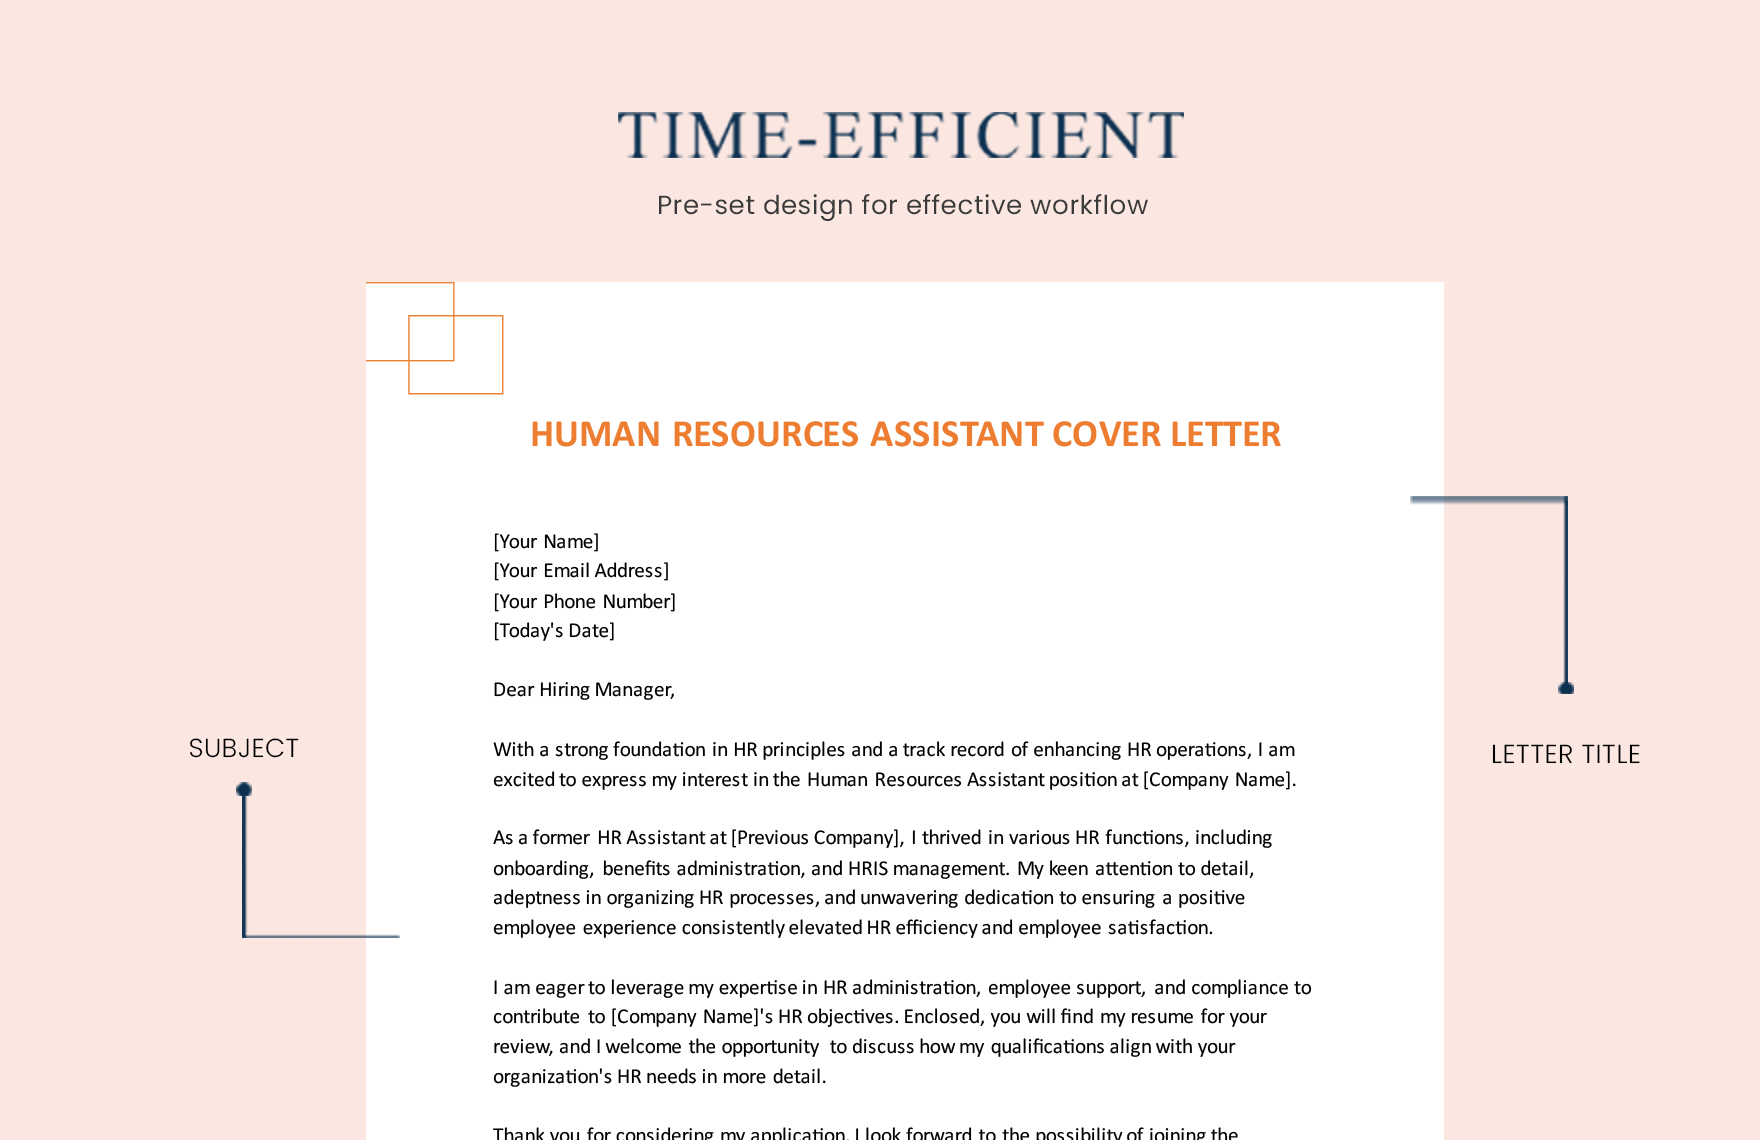 Human Resources Assistant Cover Letter